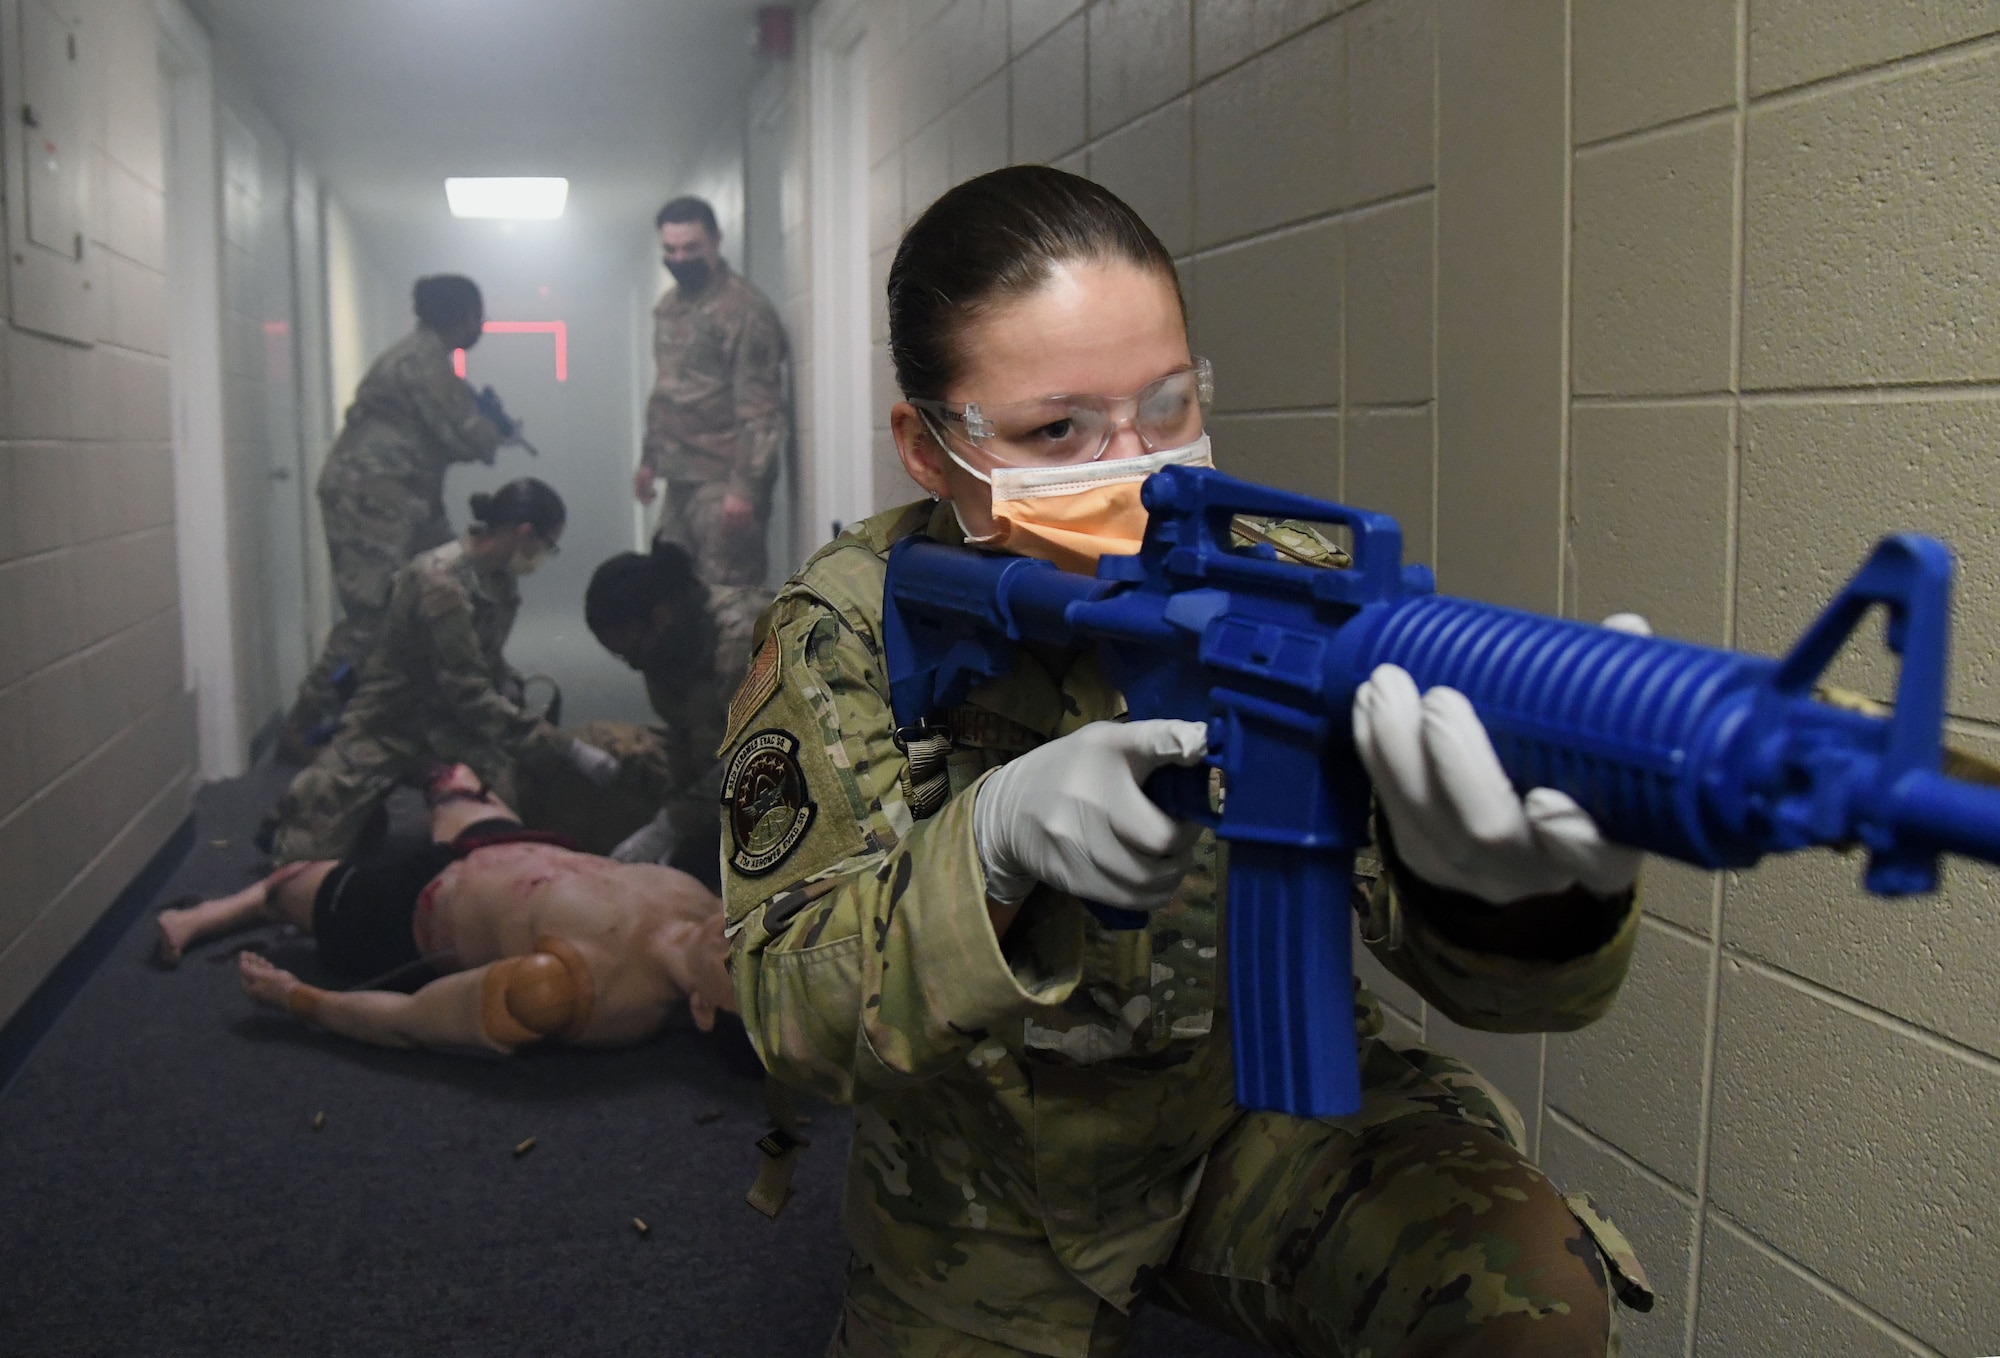 U.S. Air Force Airman 1st Class Andrea Roberts, 81st Medical Support Squadron medical technician, participates in the Tactical Combat Casualty Care training program inside the Locker House at Keesler Air Force Base, Mississippi, March 30, 2021. The training offers hands-on training in a simulated deployed environment using evidence based, life saving techniques and strategies to provide the best trauma care possible on the battlefield. (U.S. Air Force photo by Kemberly Groue)